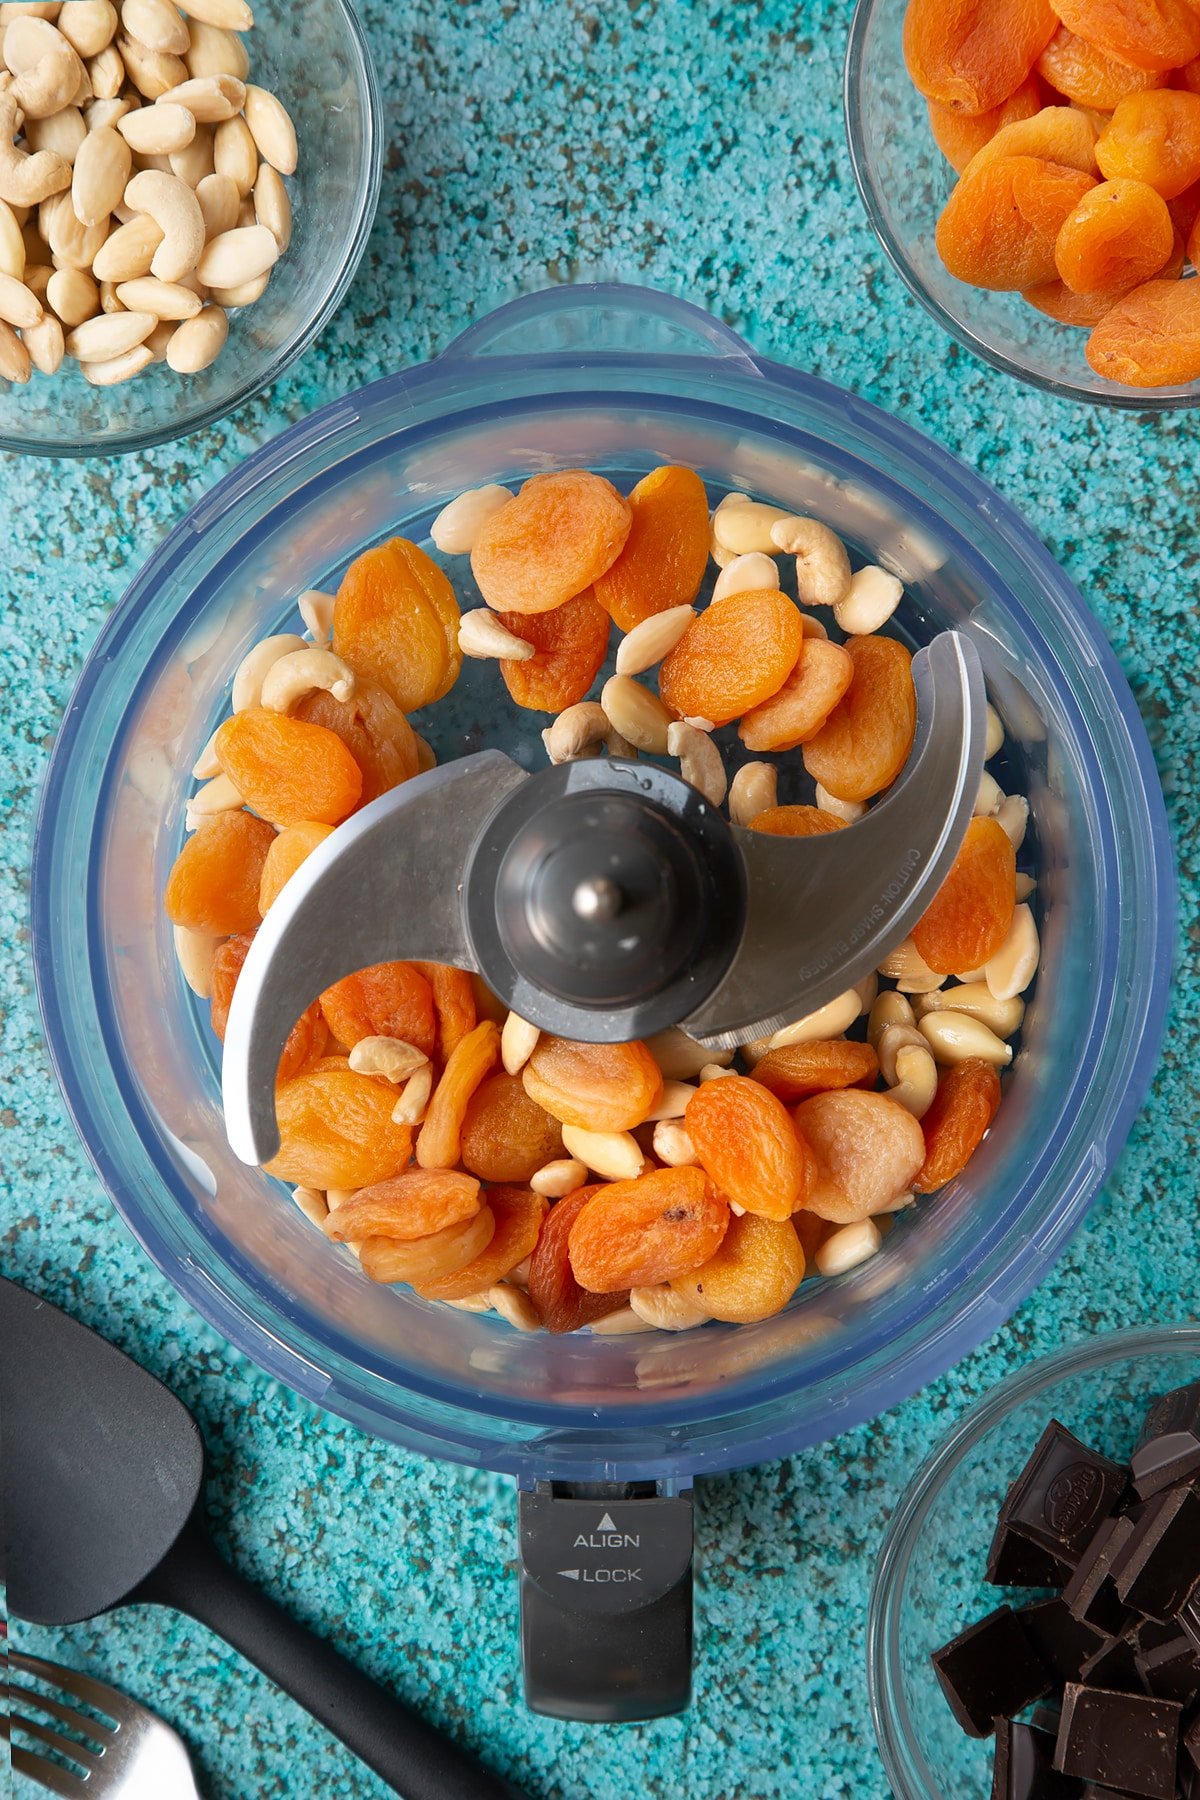 A blender containing soaked blanched almonds, apricots and a few cashews. Ingredients to make chocolate apricot balls surround the blender.